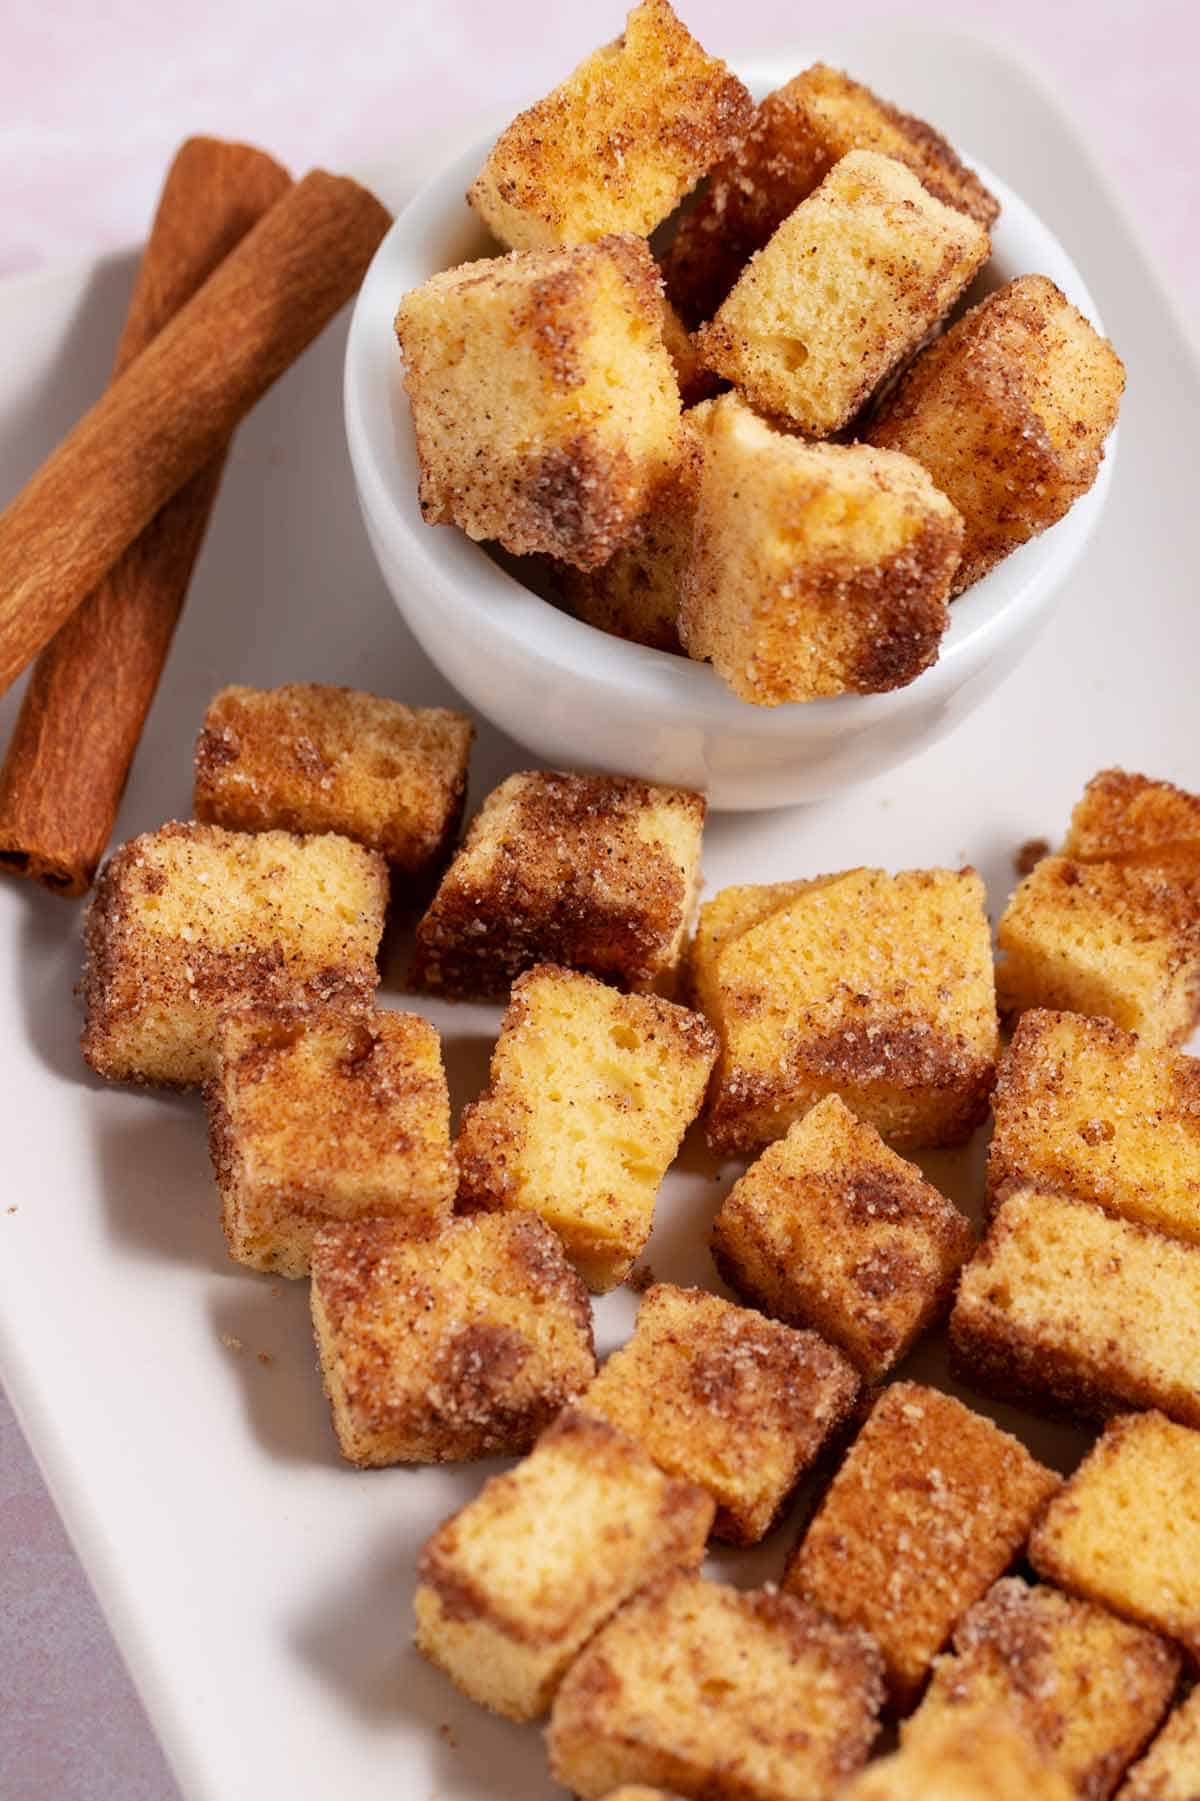 Bowl and plate filled with cinnamon sugar pound cake croutons. Two cinnamon sticks are on the plate too.